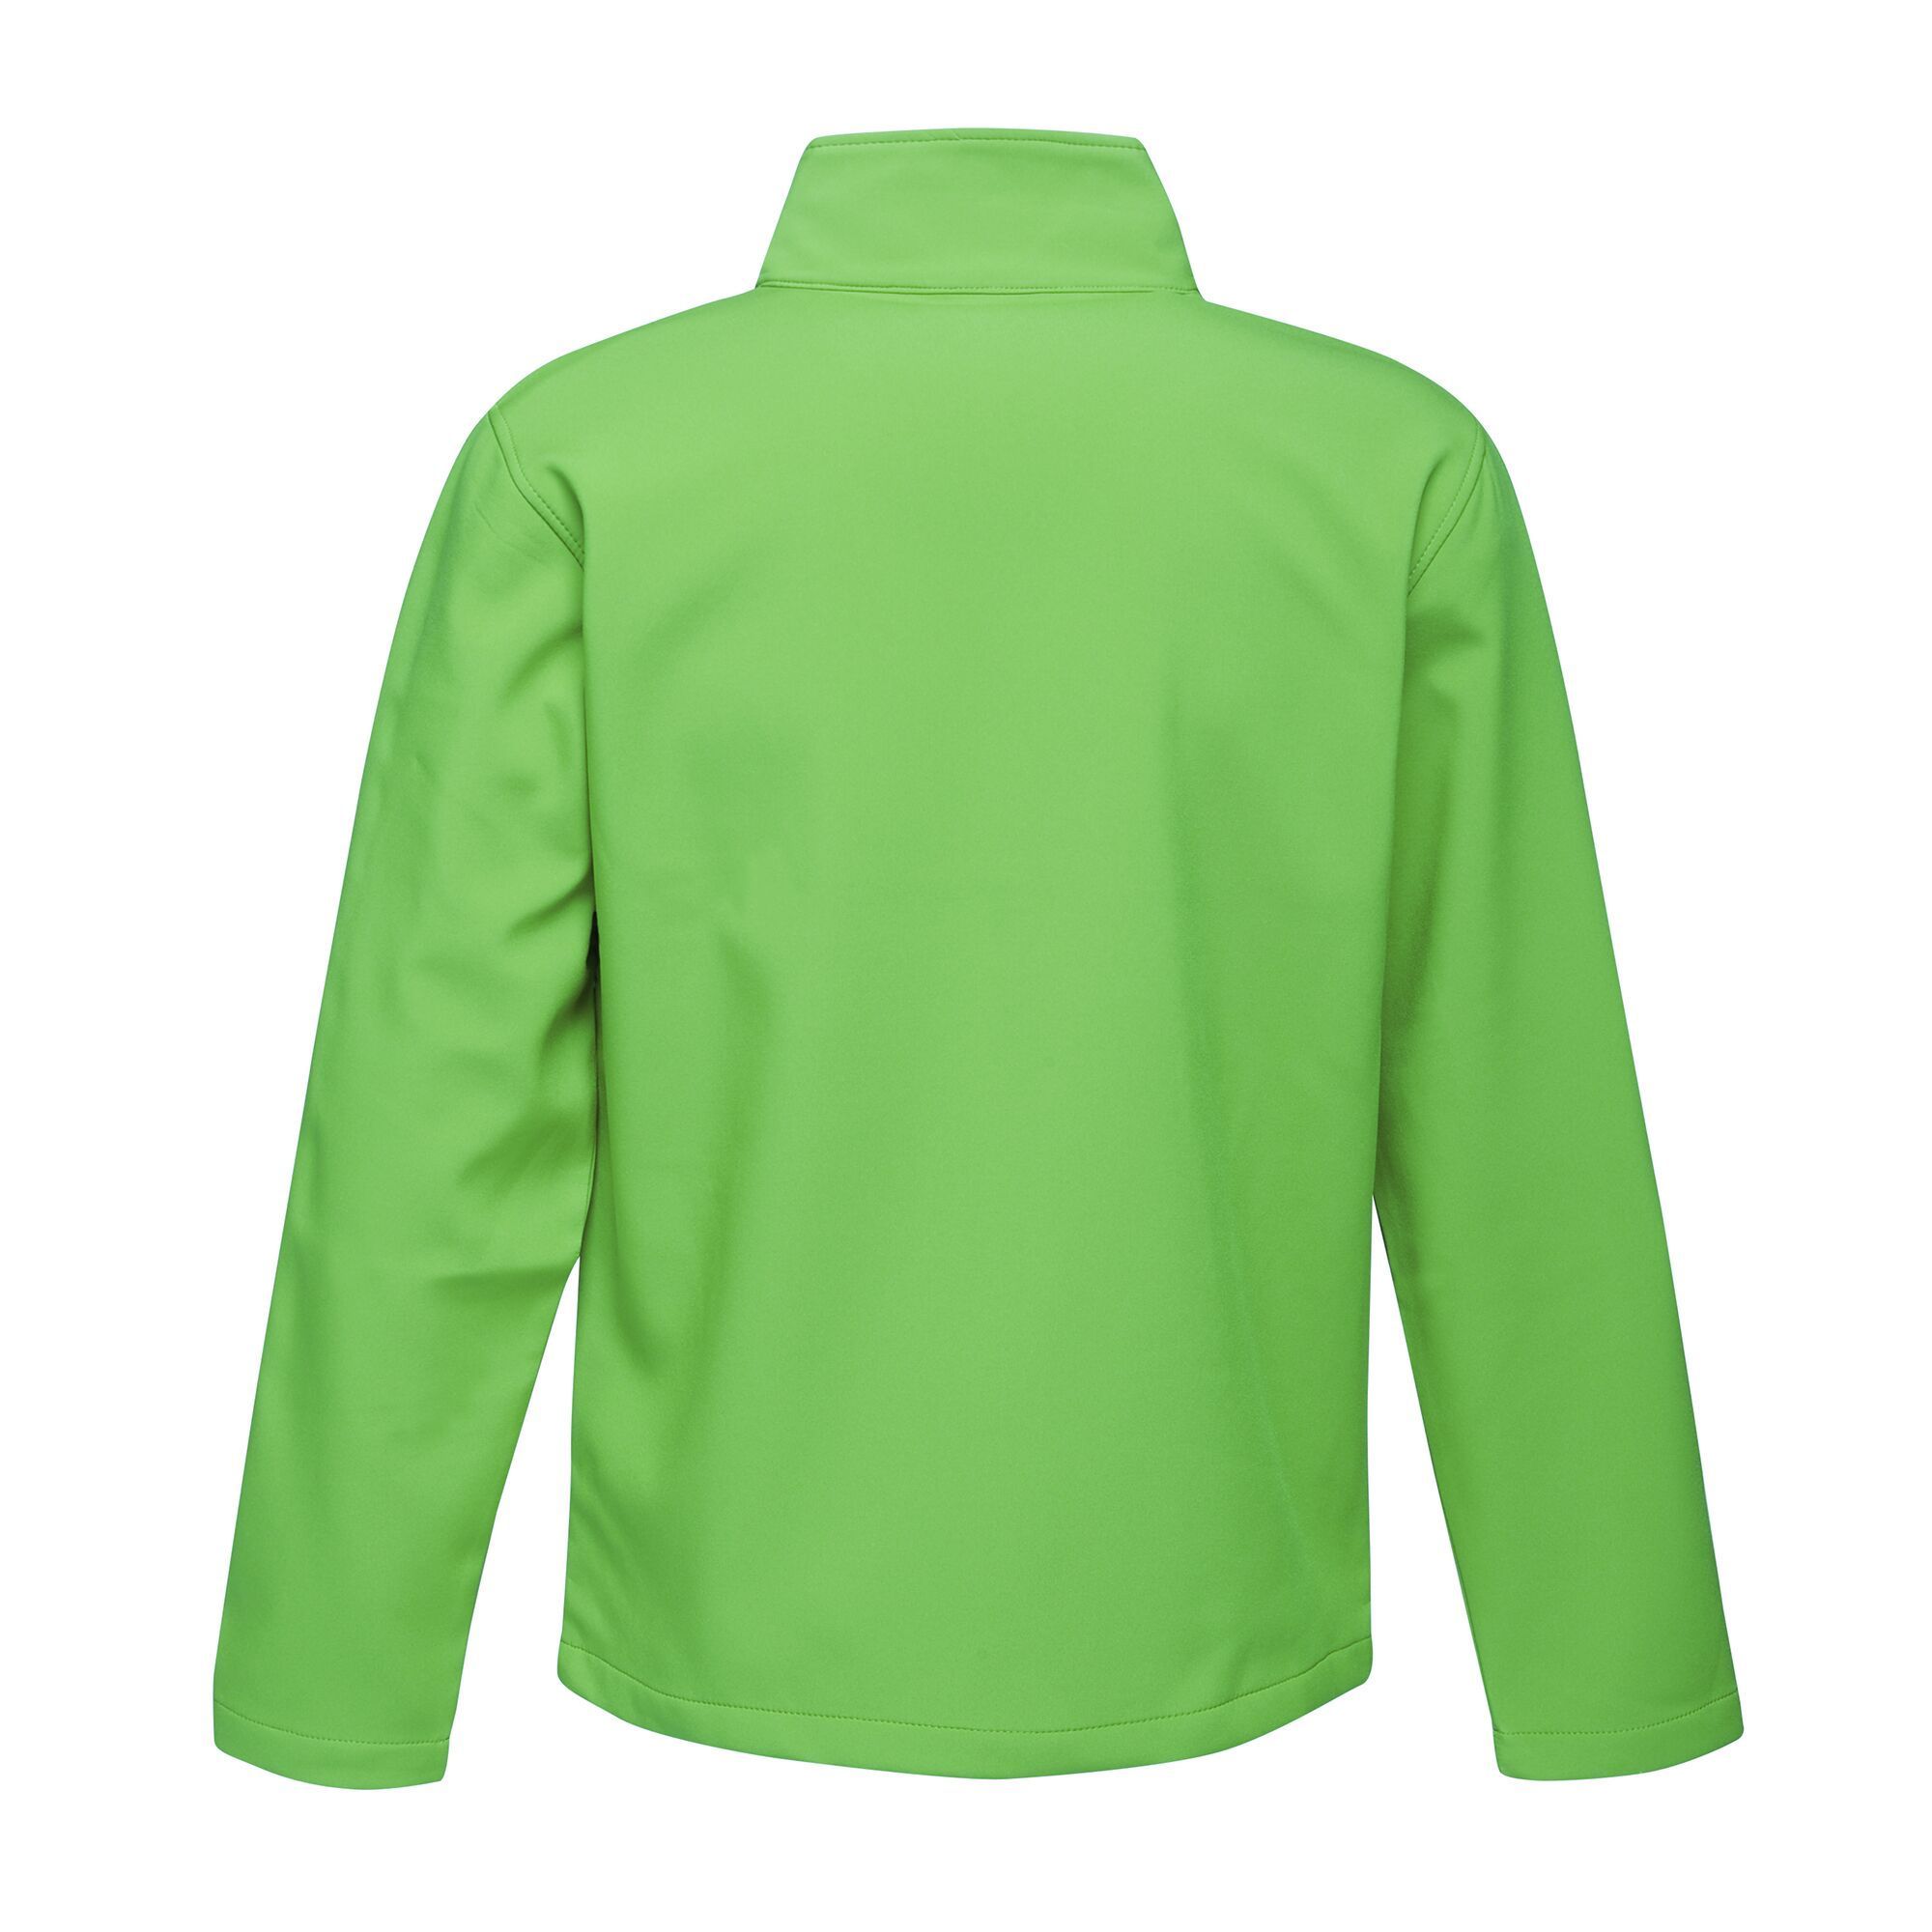 100% Polyester. Warm backed woven softshell jacket. Printable softshell fabric. Wind resistant membrane fabric. Durable water repellent finish. Inner zip guard, 2 lower pockets and adjustable shockcord hem.